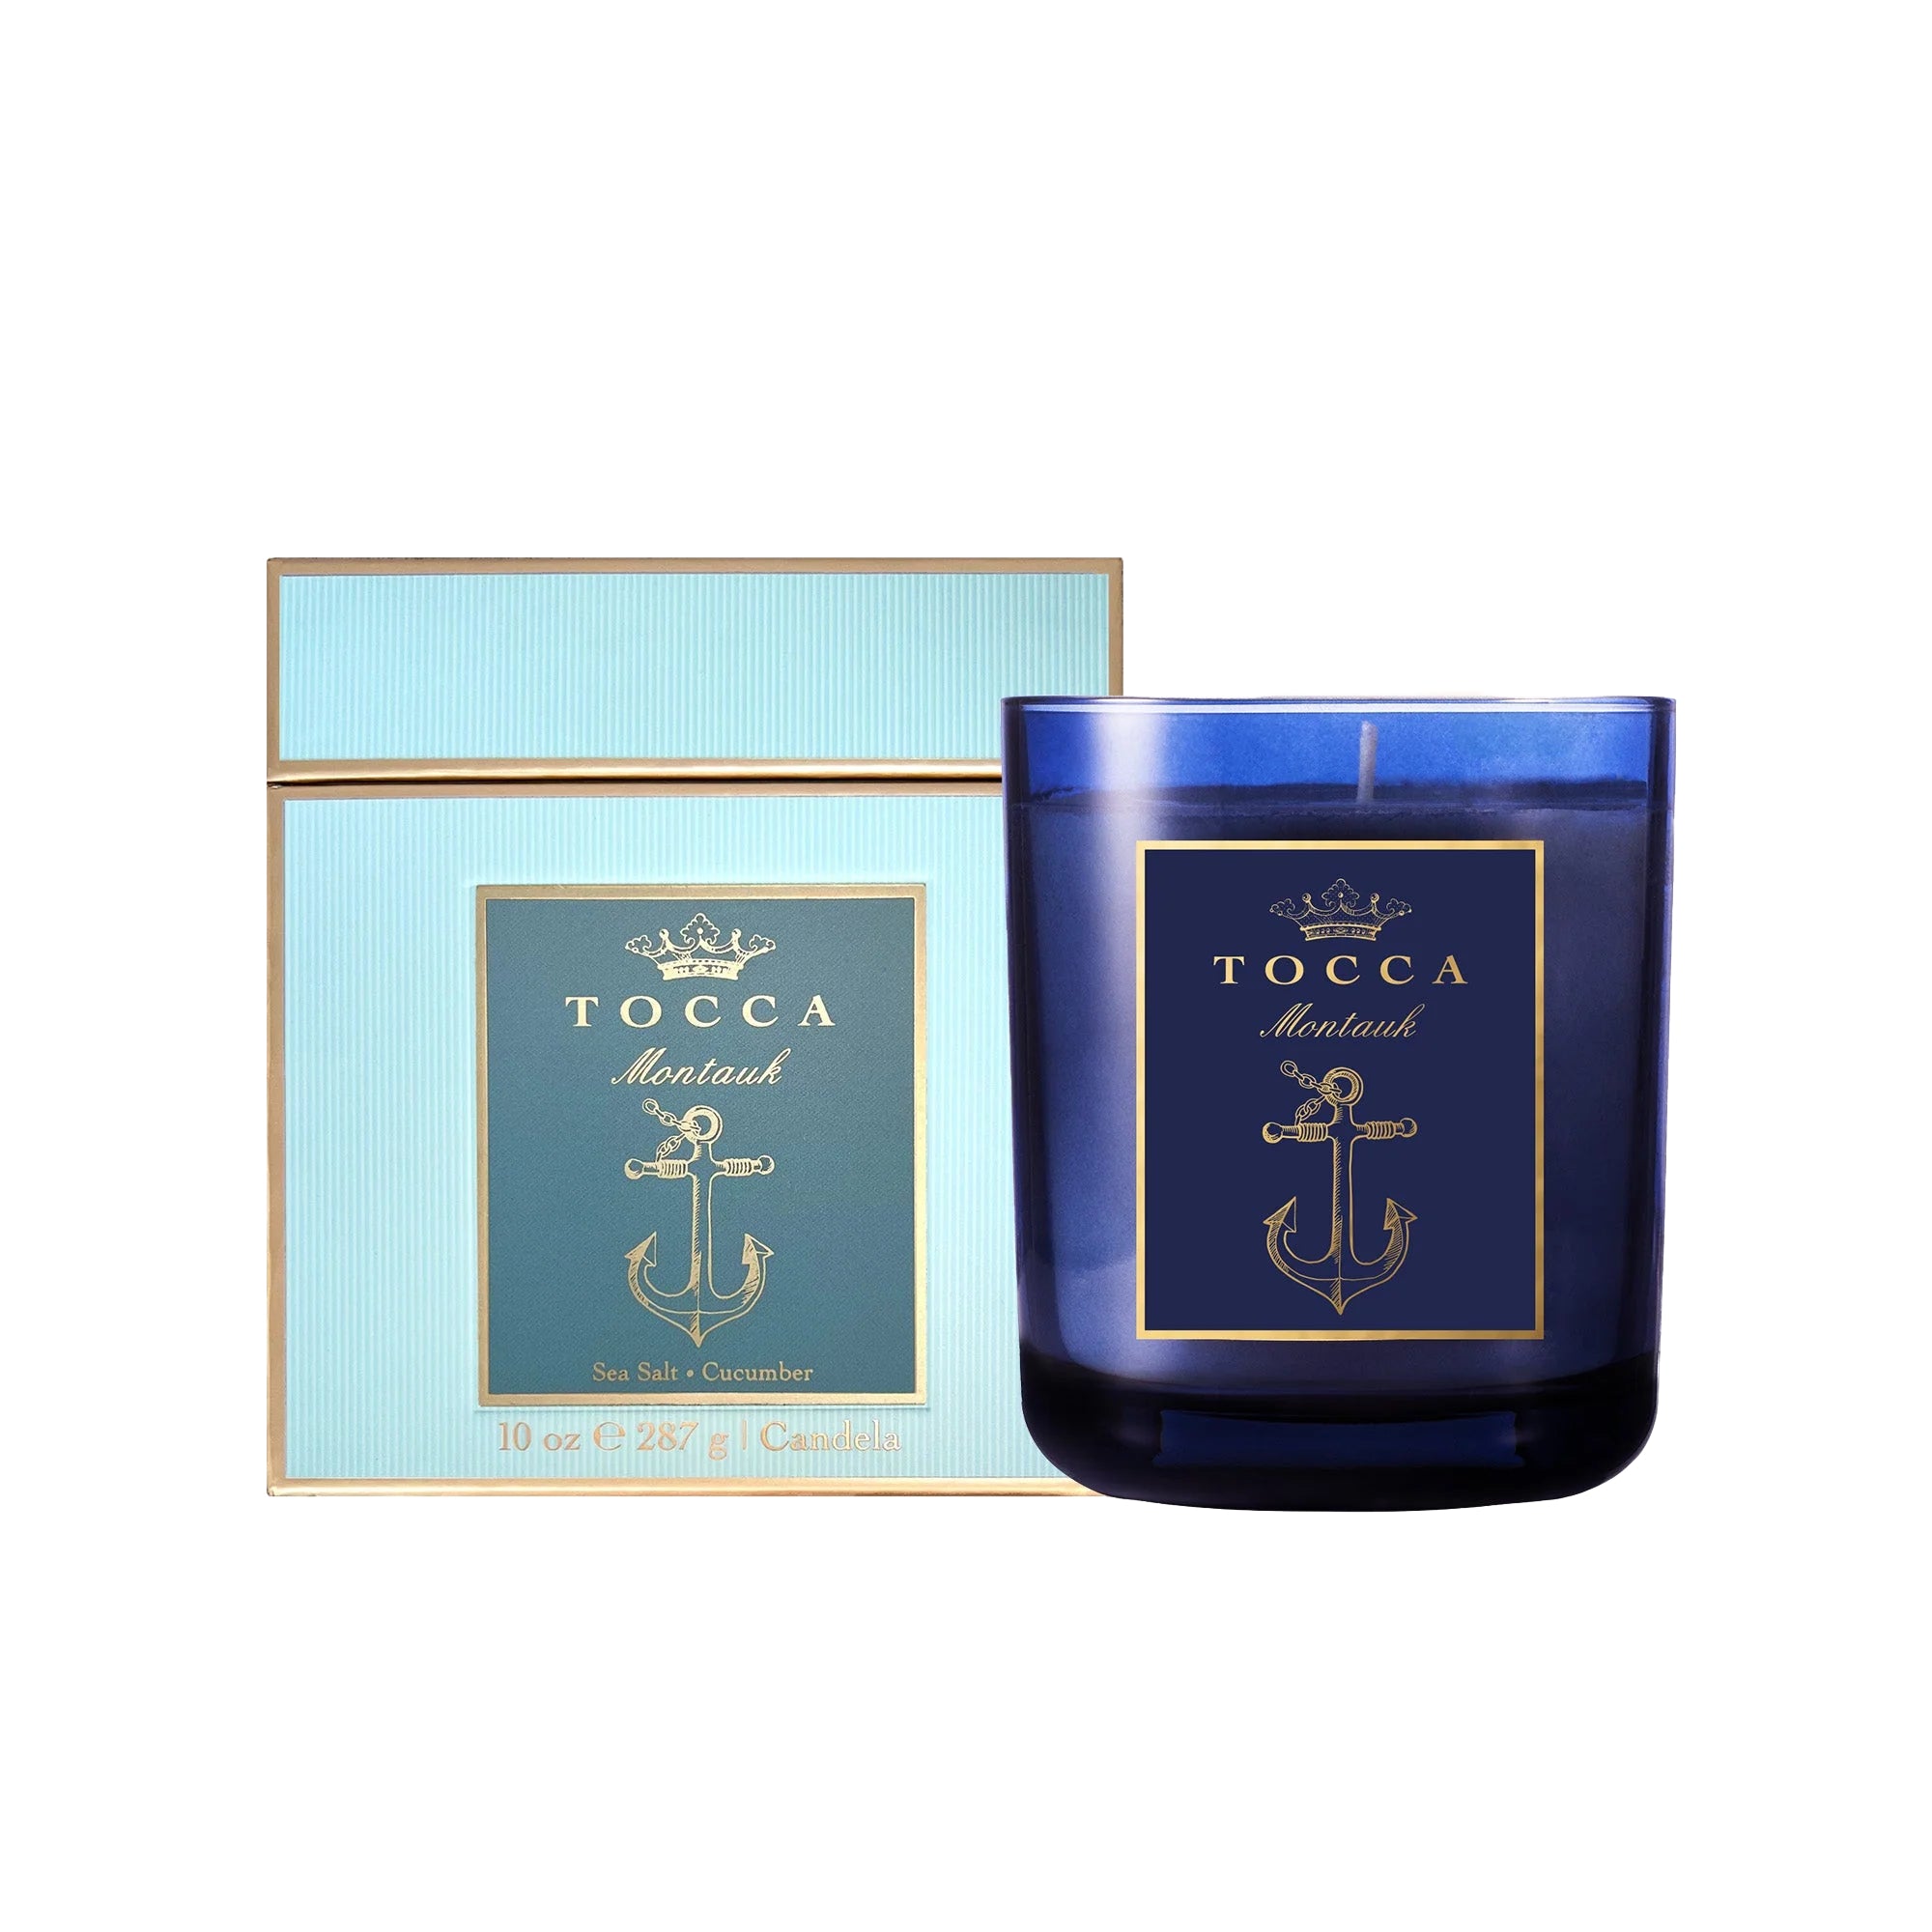 Tocca Candela Classica Montauk Scented Candle – 10oz.